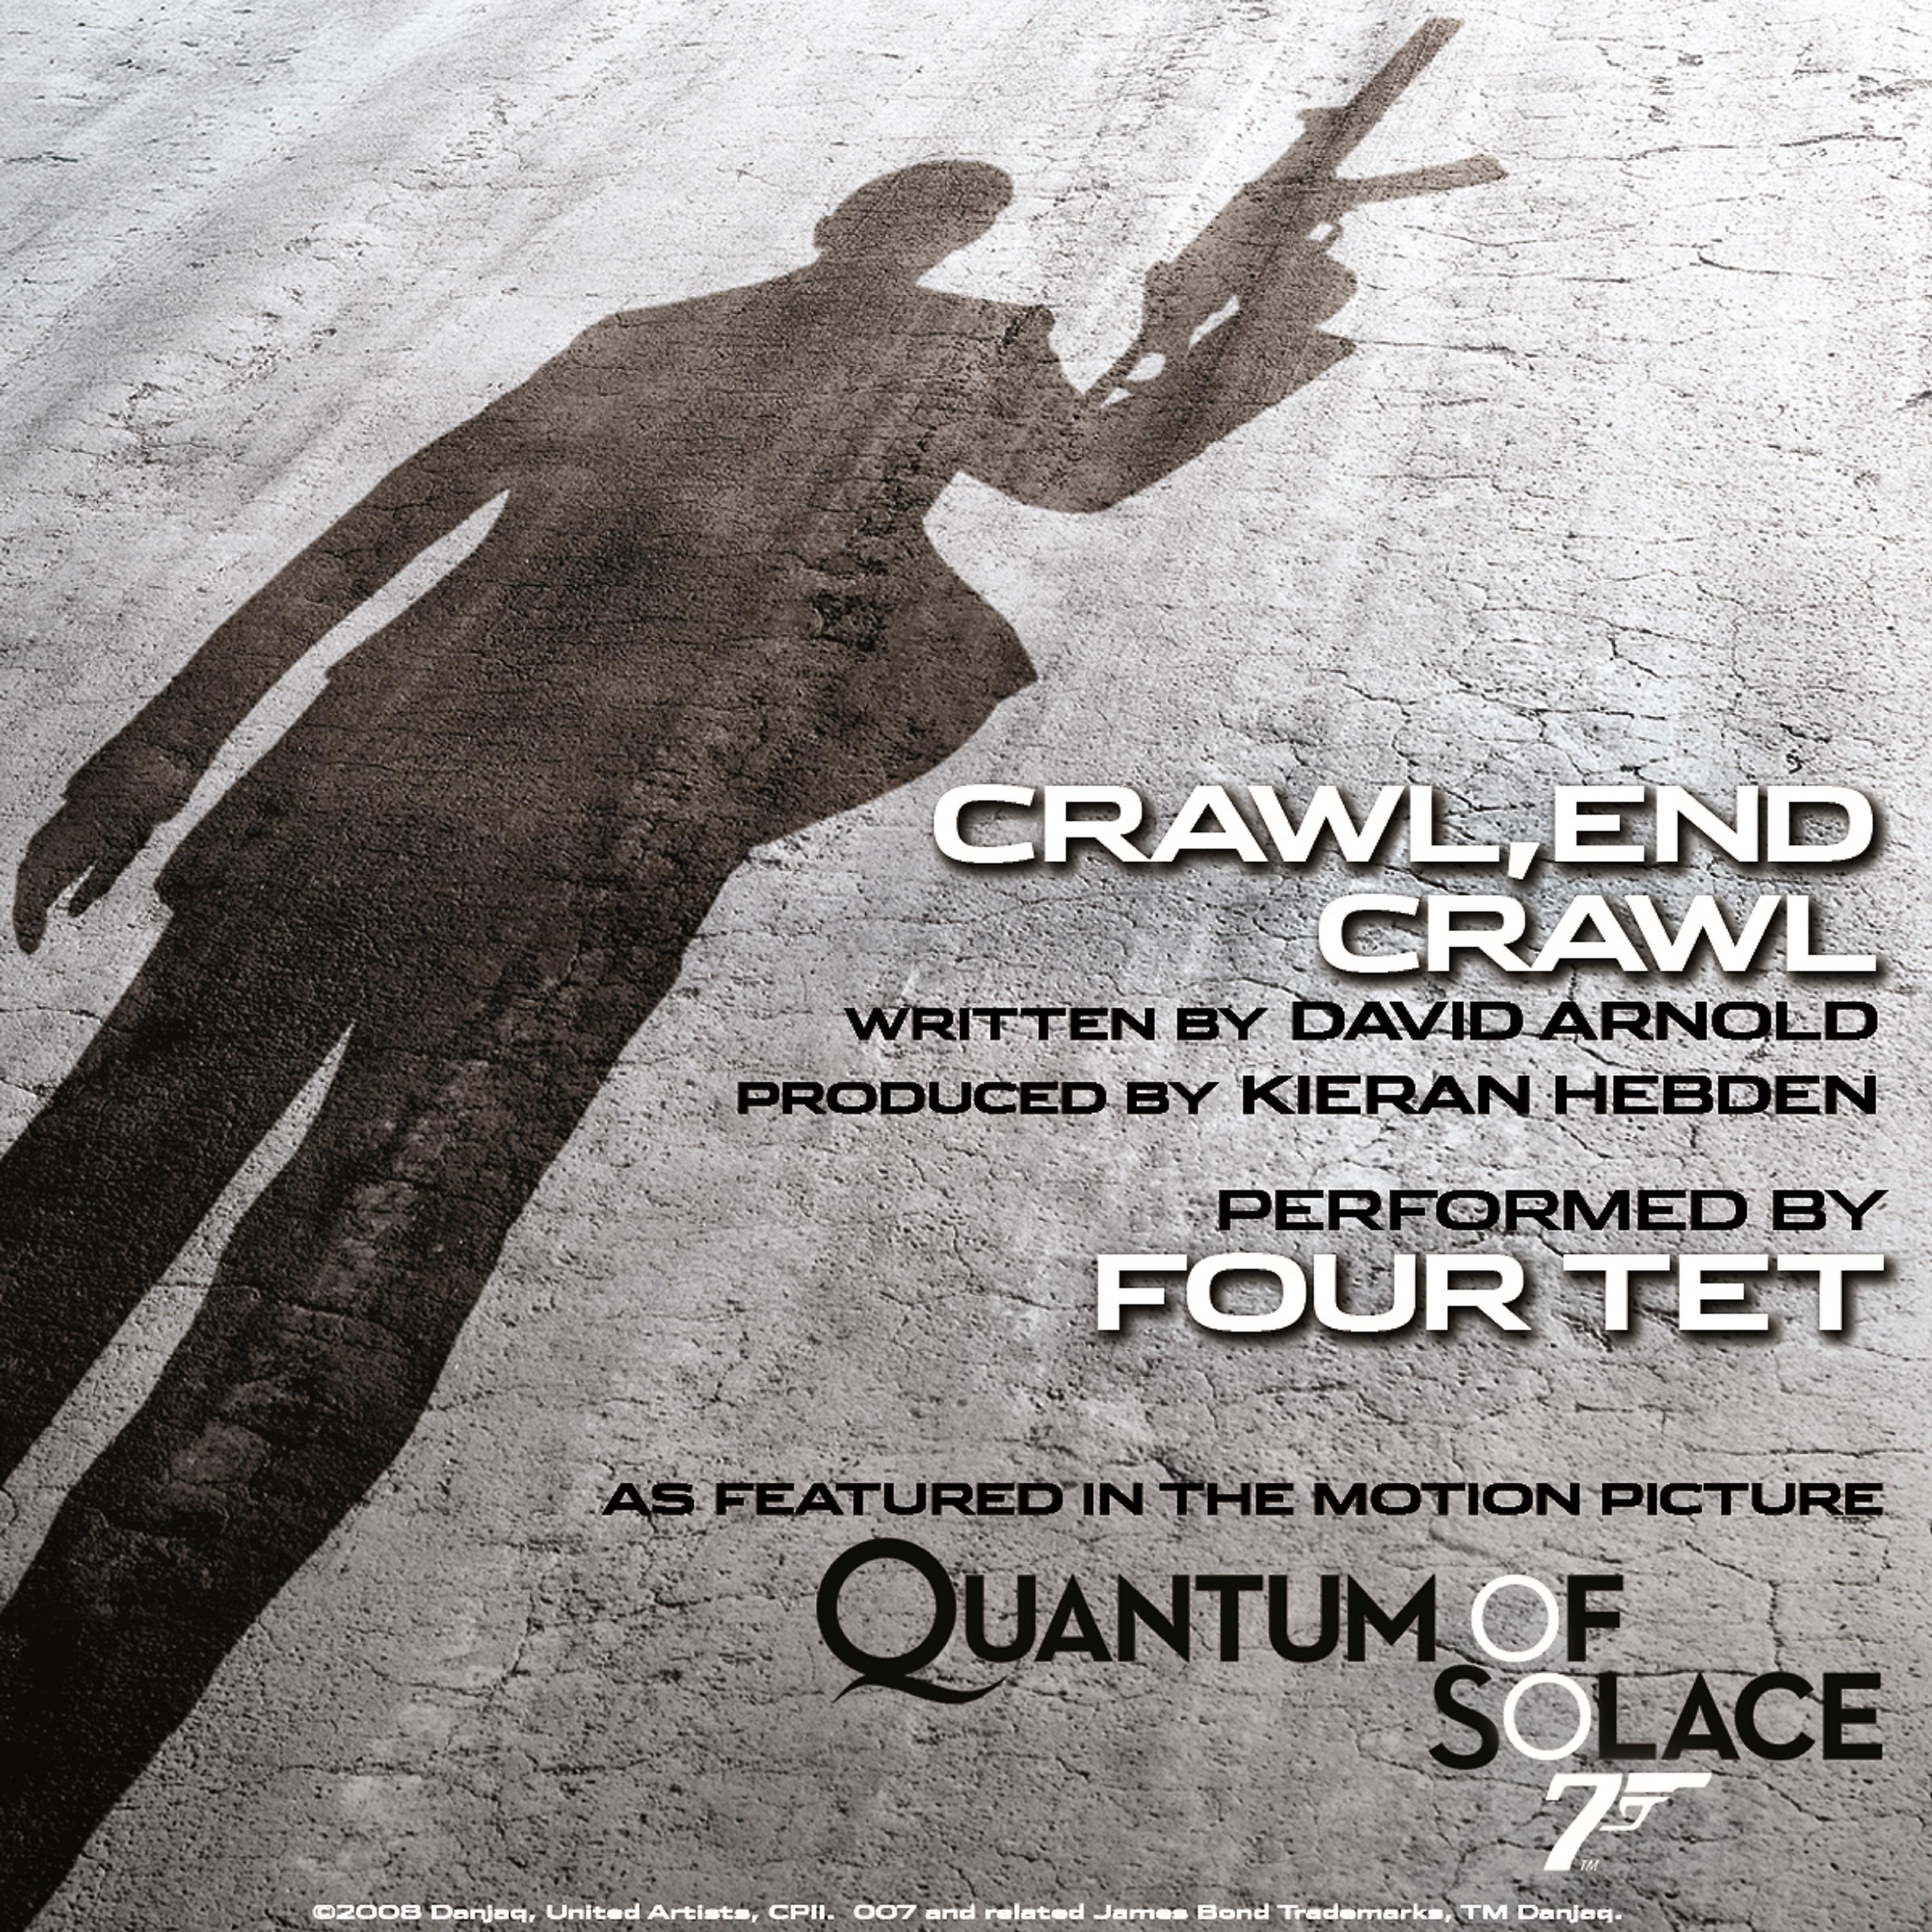 Постер альбома Crawl, End Crawl (From the Motion Picture "Quantum of Solace")